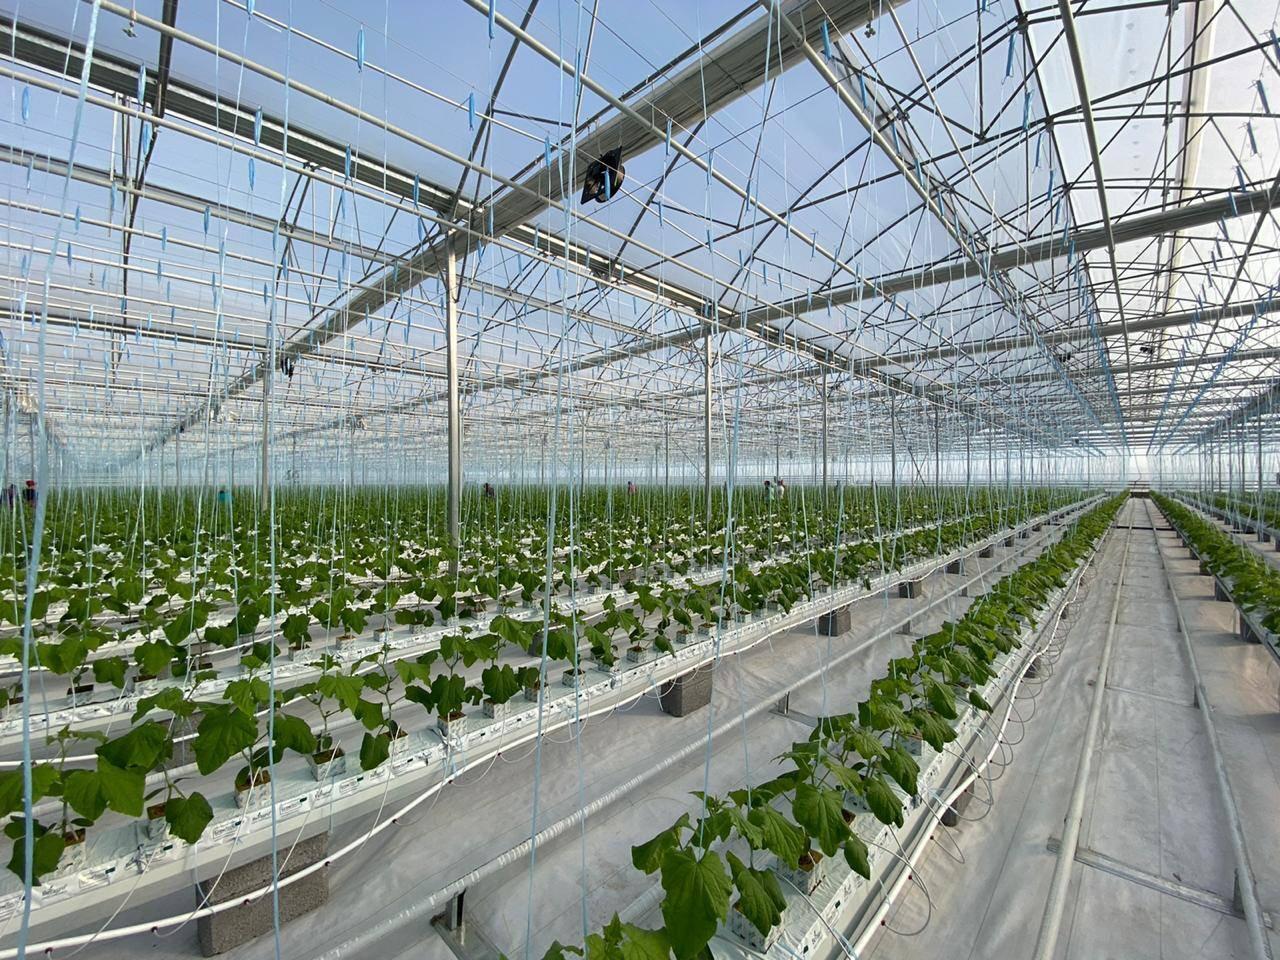 Shymkent plans to create an agro-industrial zone and build new greenhouses